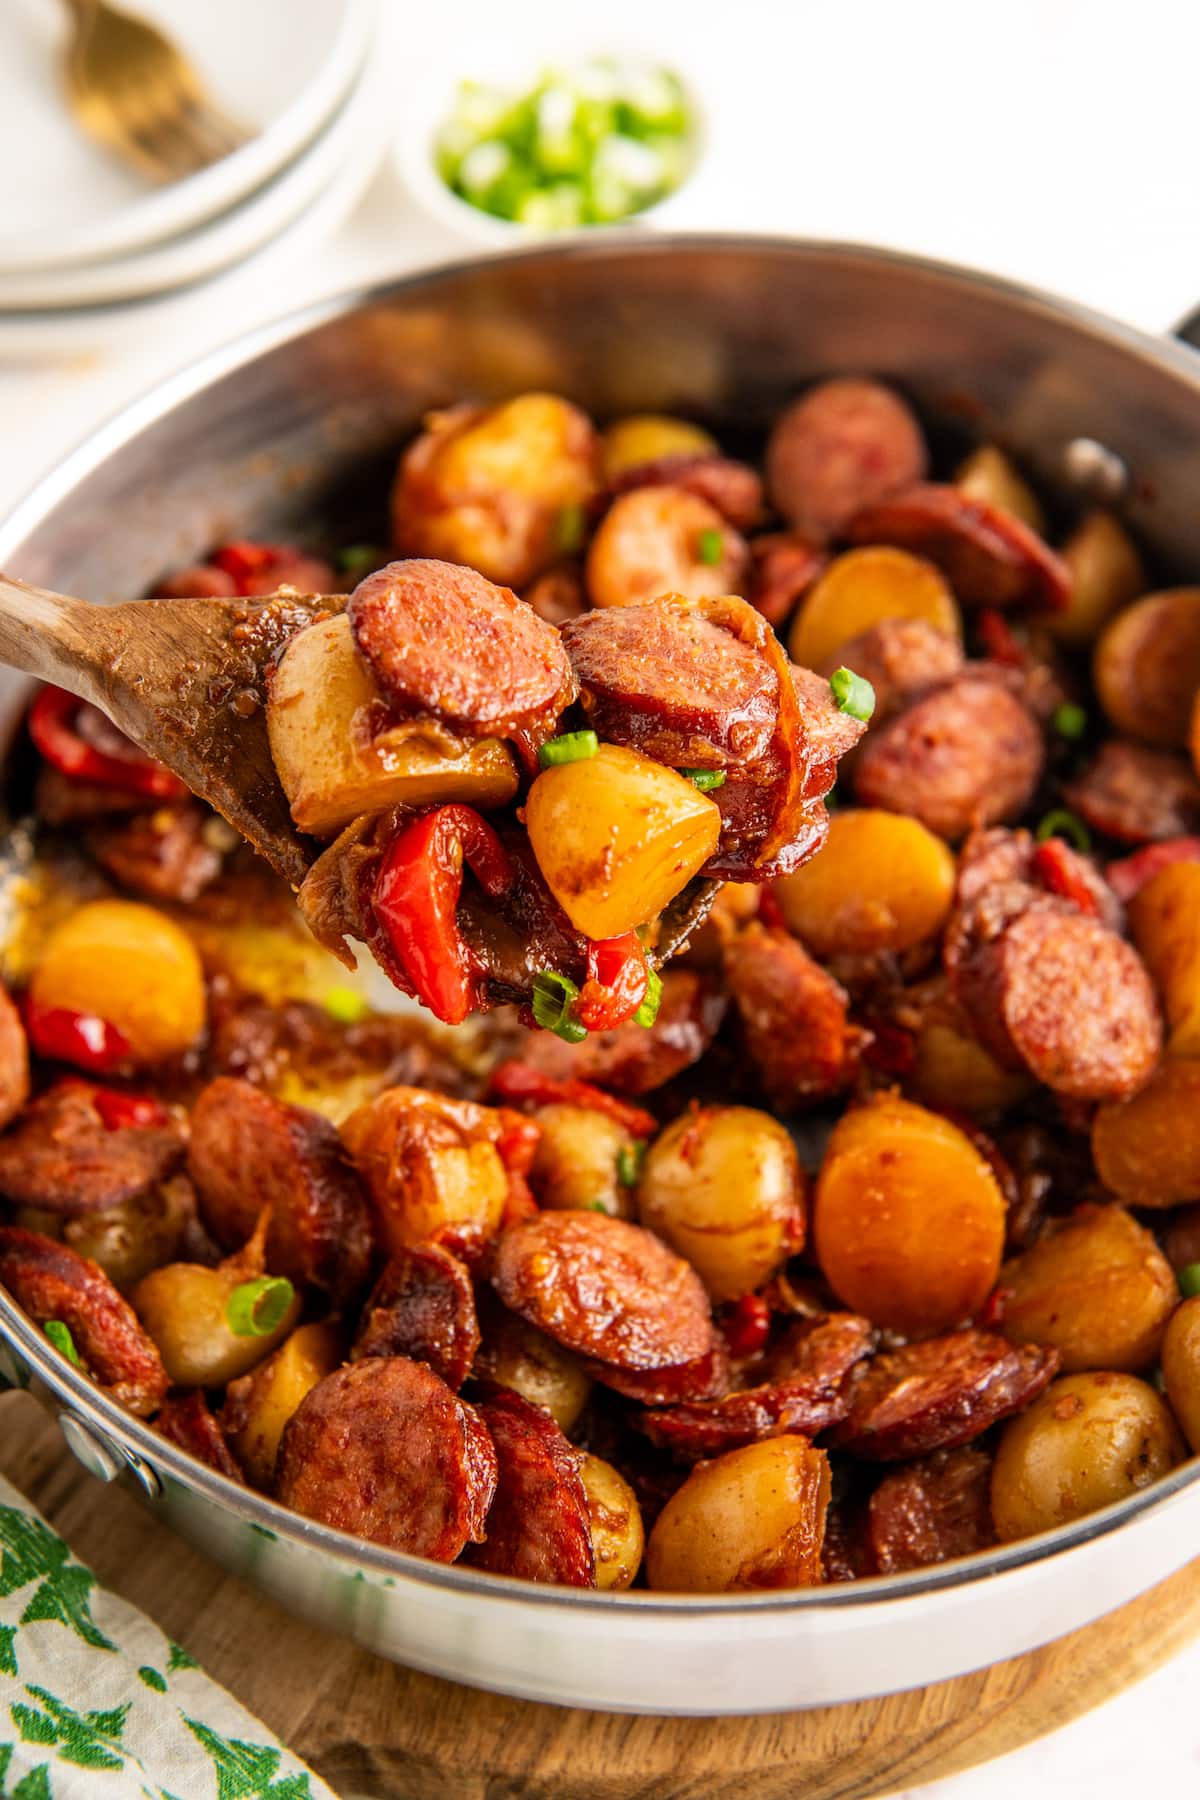 A mixing bowl filled with sausage and potatoes